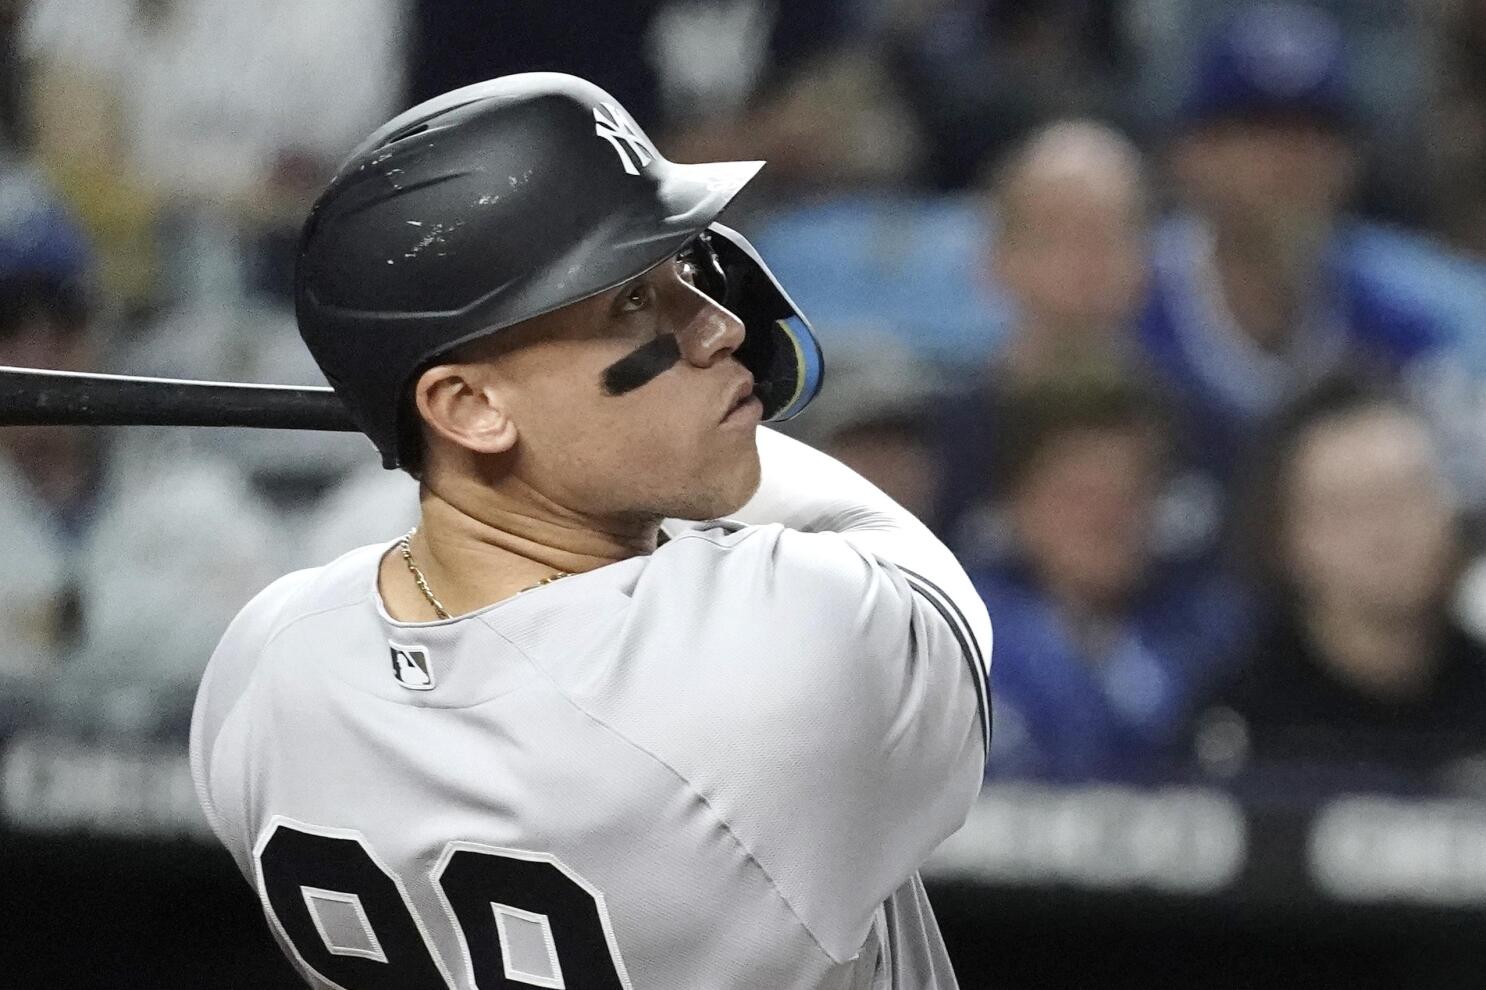 Yankees hit 4 HRs, beat Royals 12-2 for 7th straight win